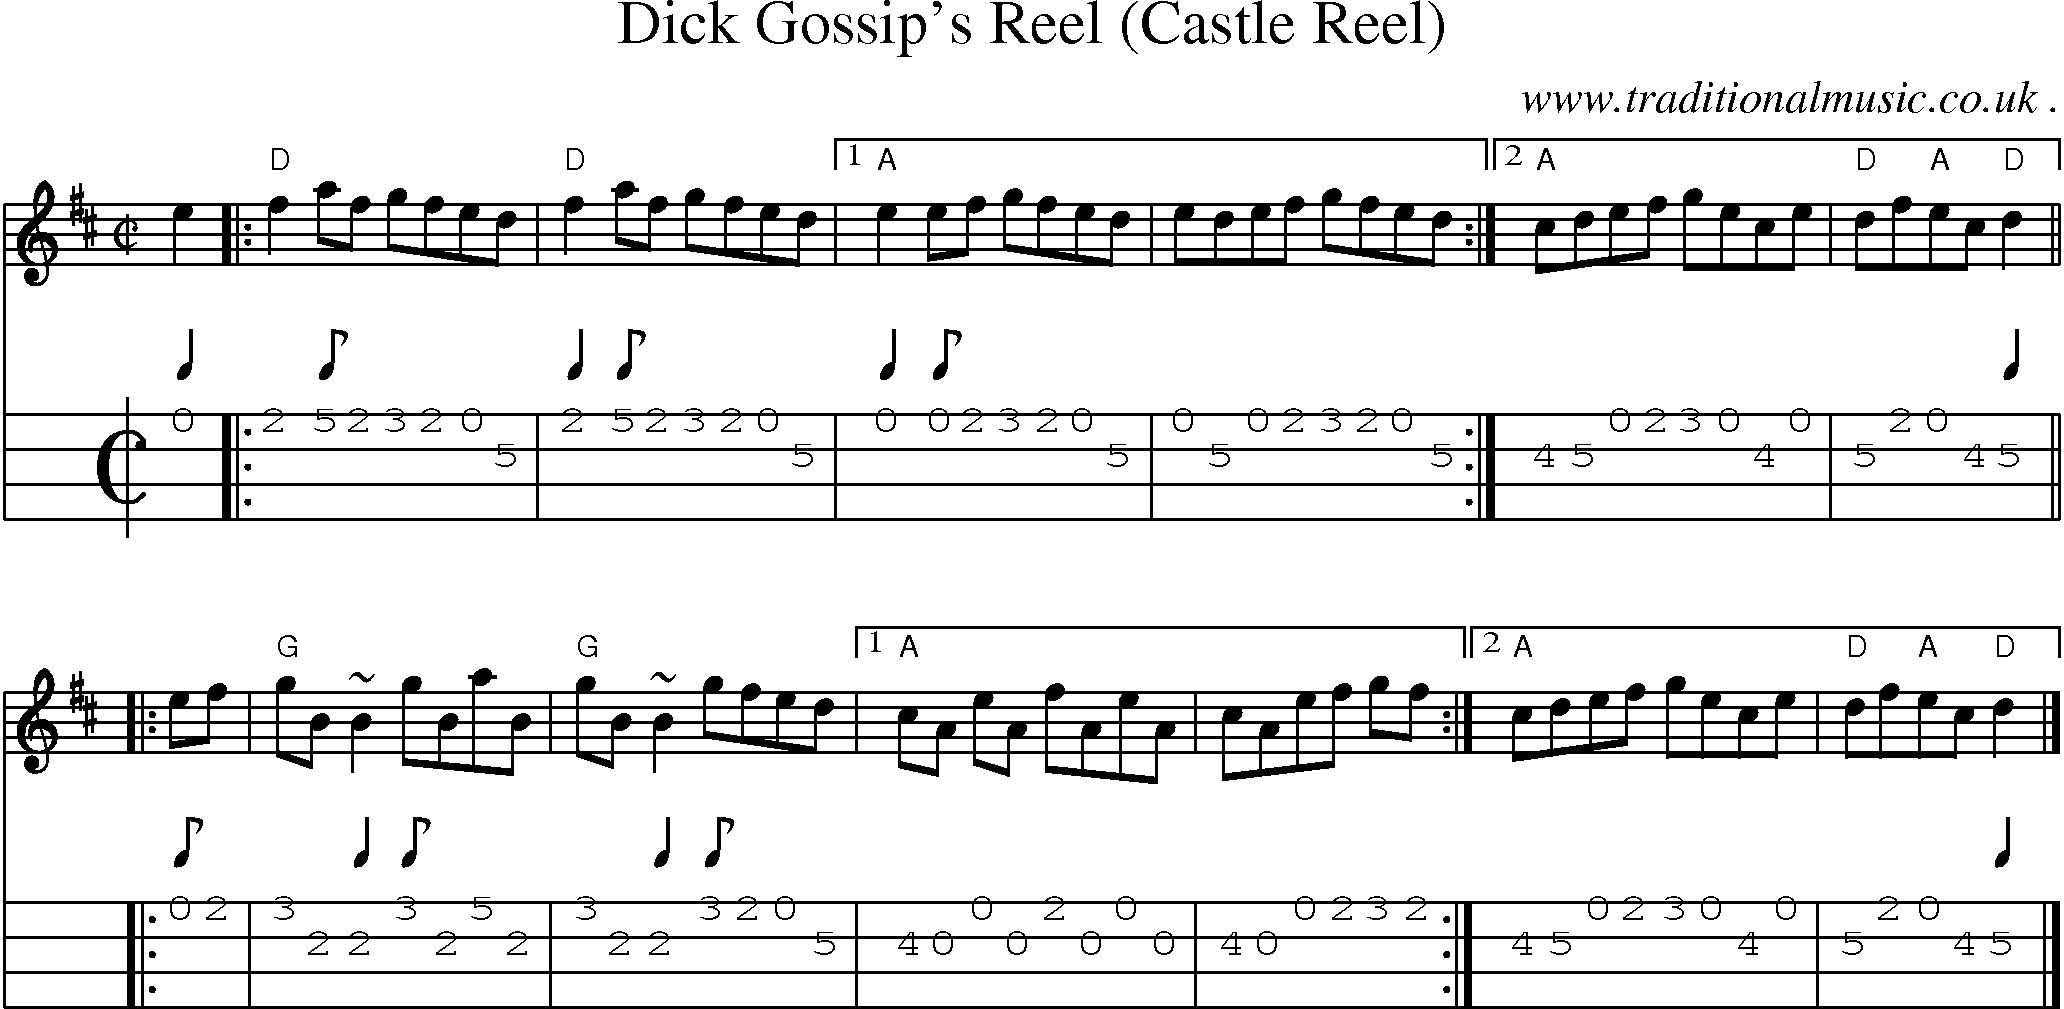 Sheet-music  score, Chords and Mandolin Tabs for Dick Gossips Reel Castle Reel